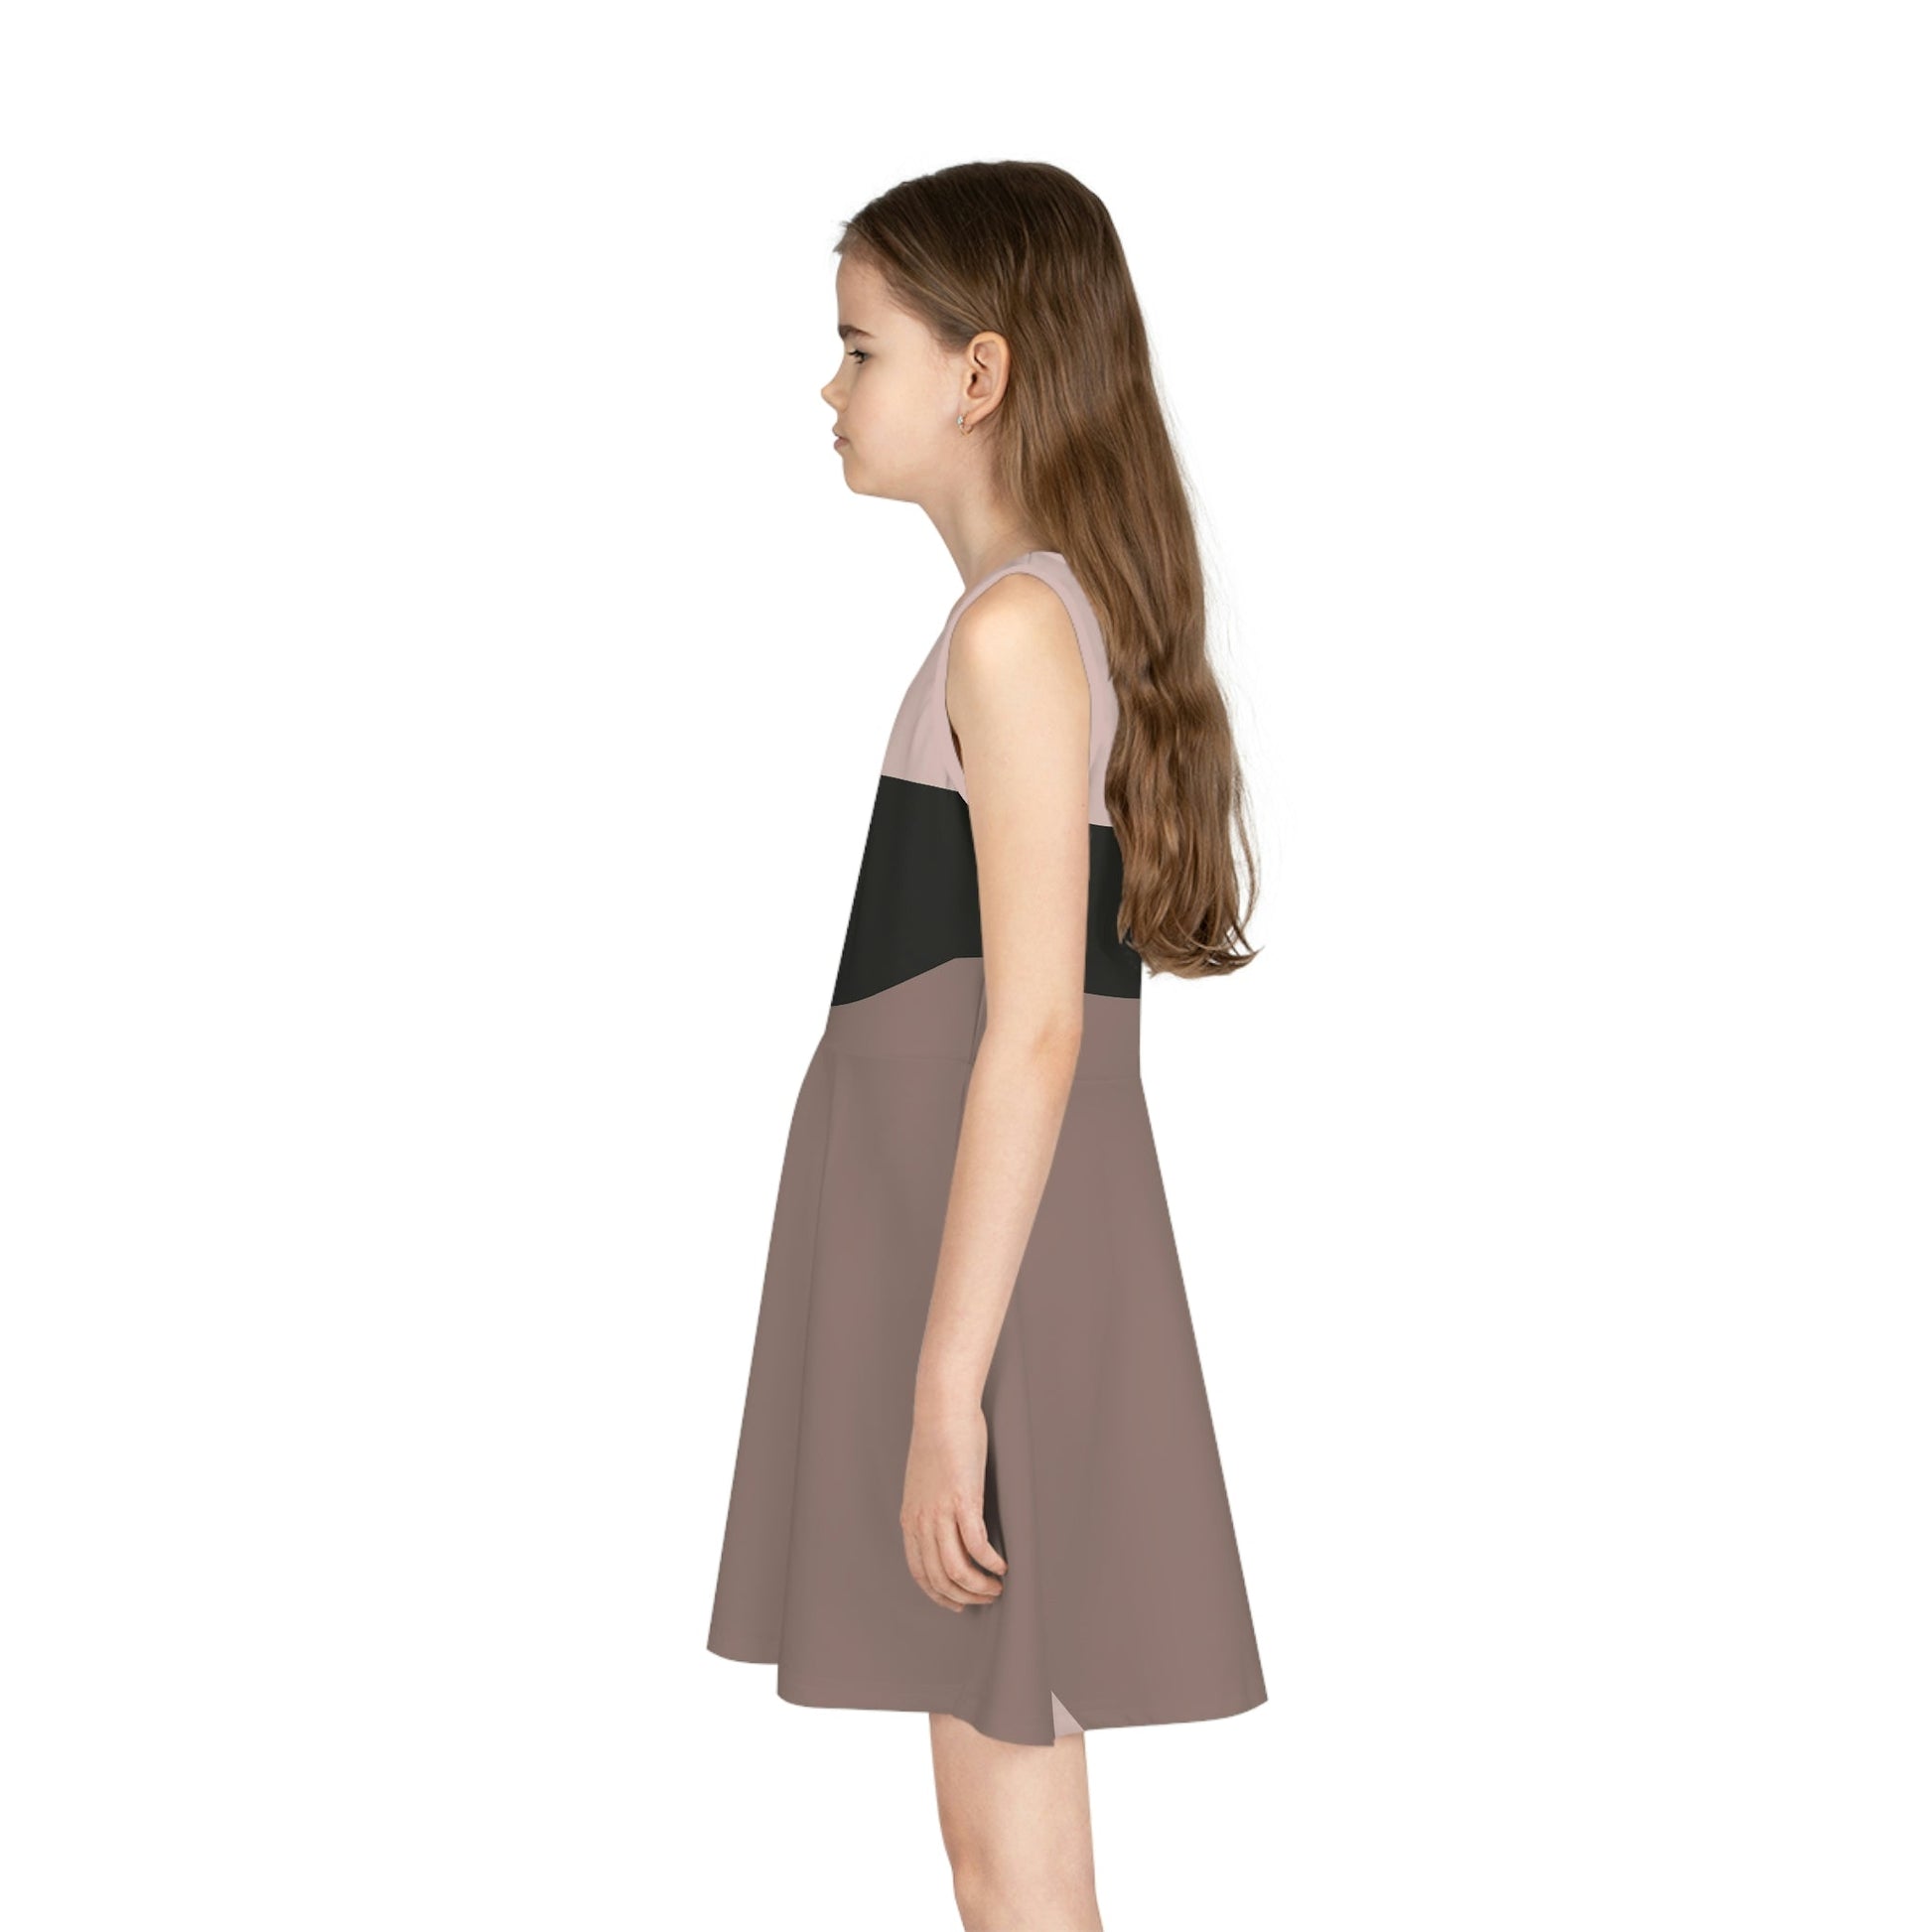 The Briar Rose Girls' Sleeveless Sundress (AOP) All Over PrintAOPAOP Clothing#tag4##tag5##tag6#